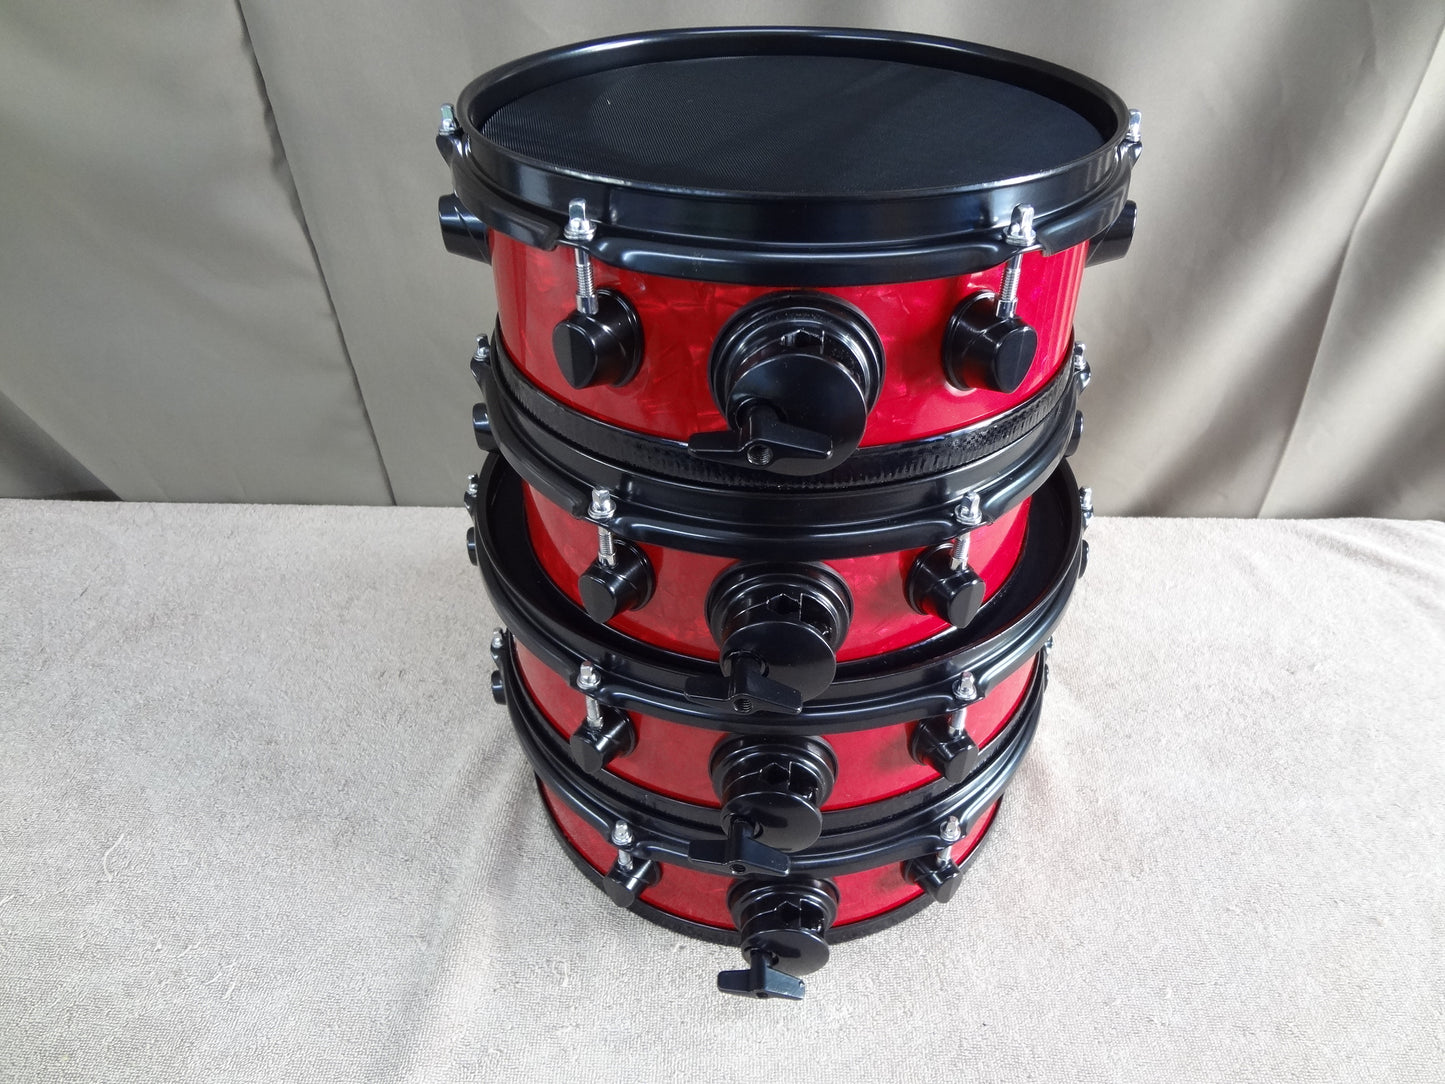 NEW 4 PIECE CUSTOM ELECTRONIC DRUM SHELL PACK - RED PEARL